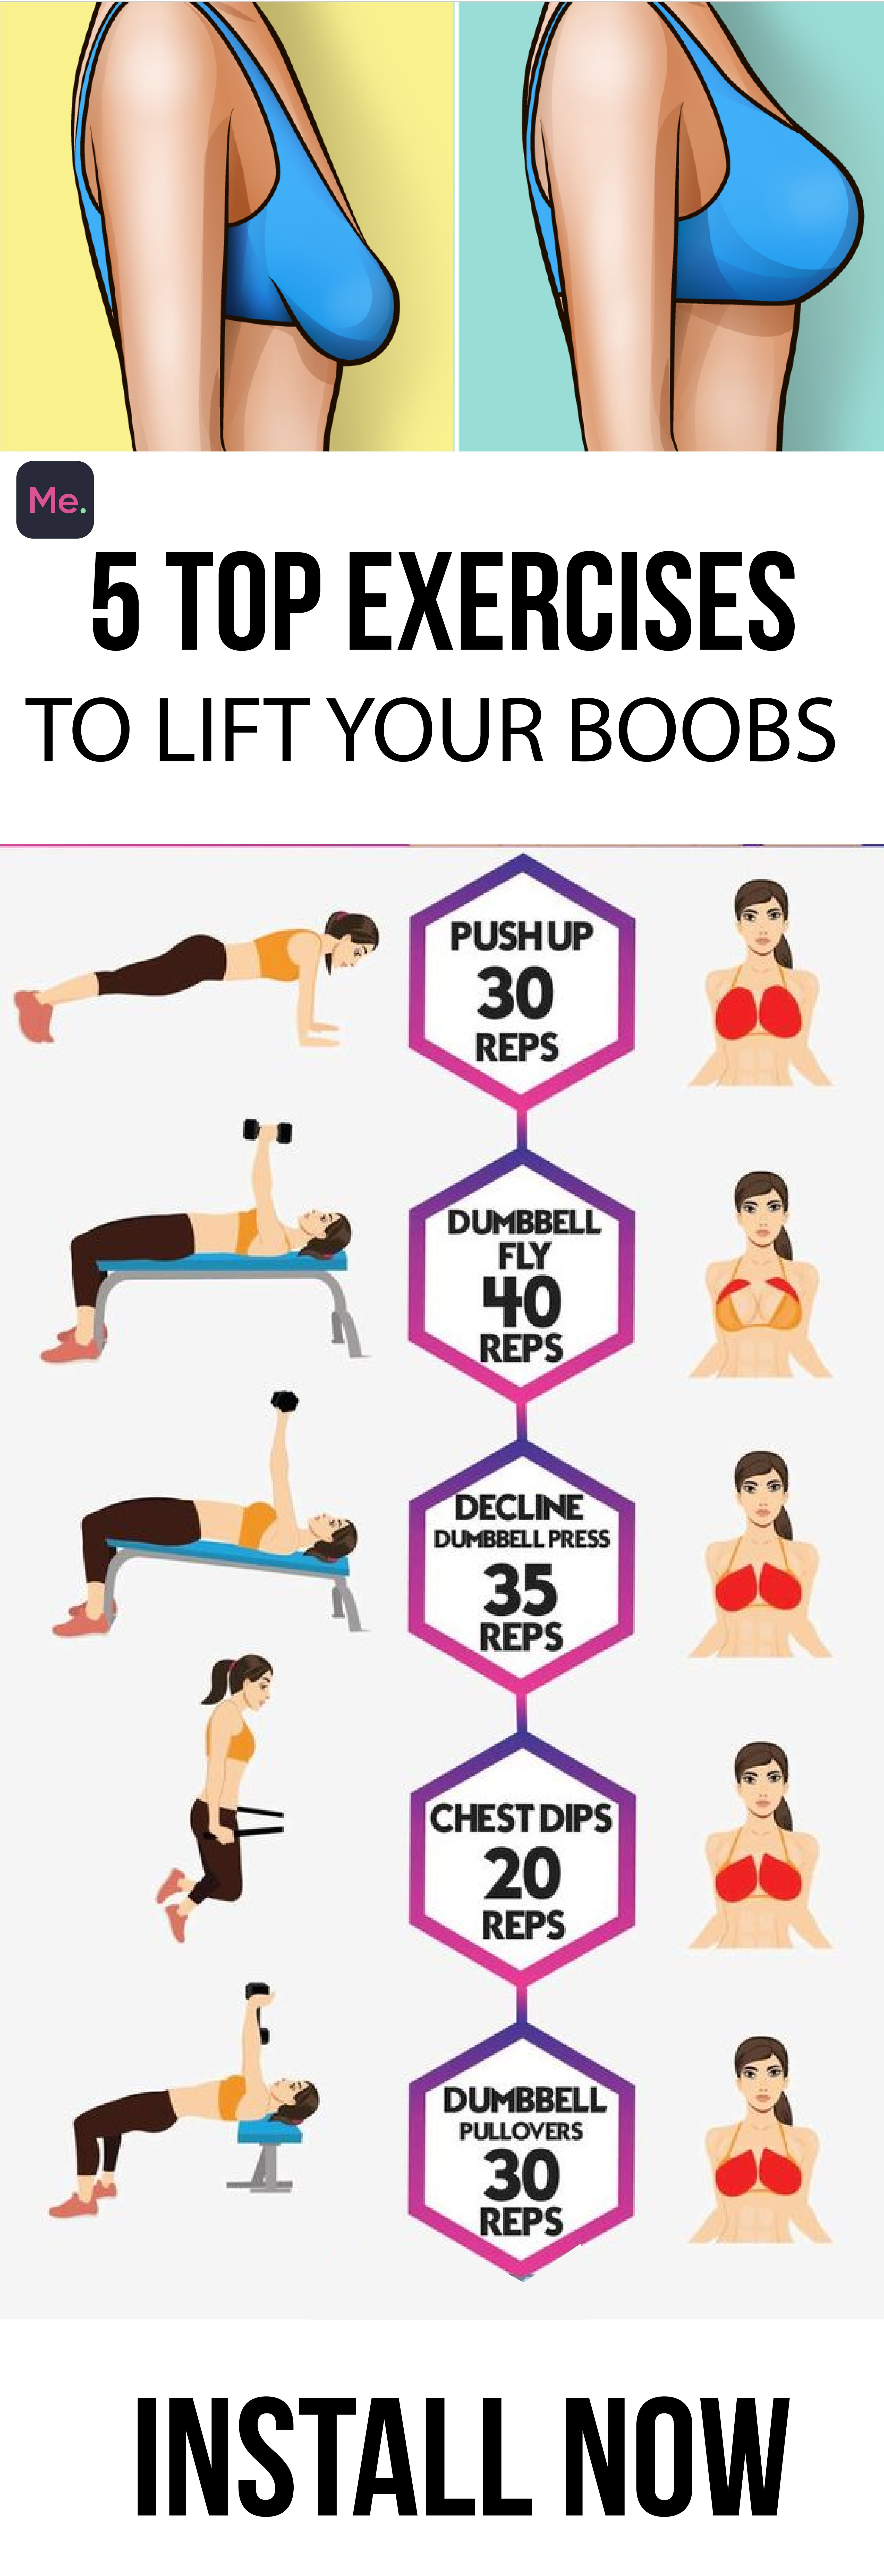 Top 5 Exercises to Lift Your Boobs -   21 fitness workouts life
 ideas